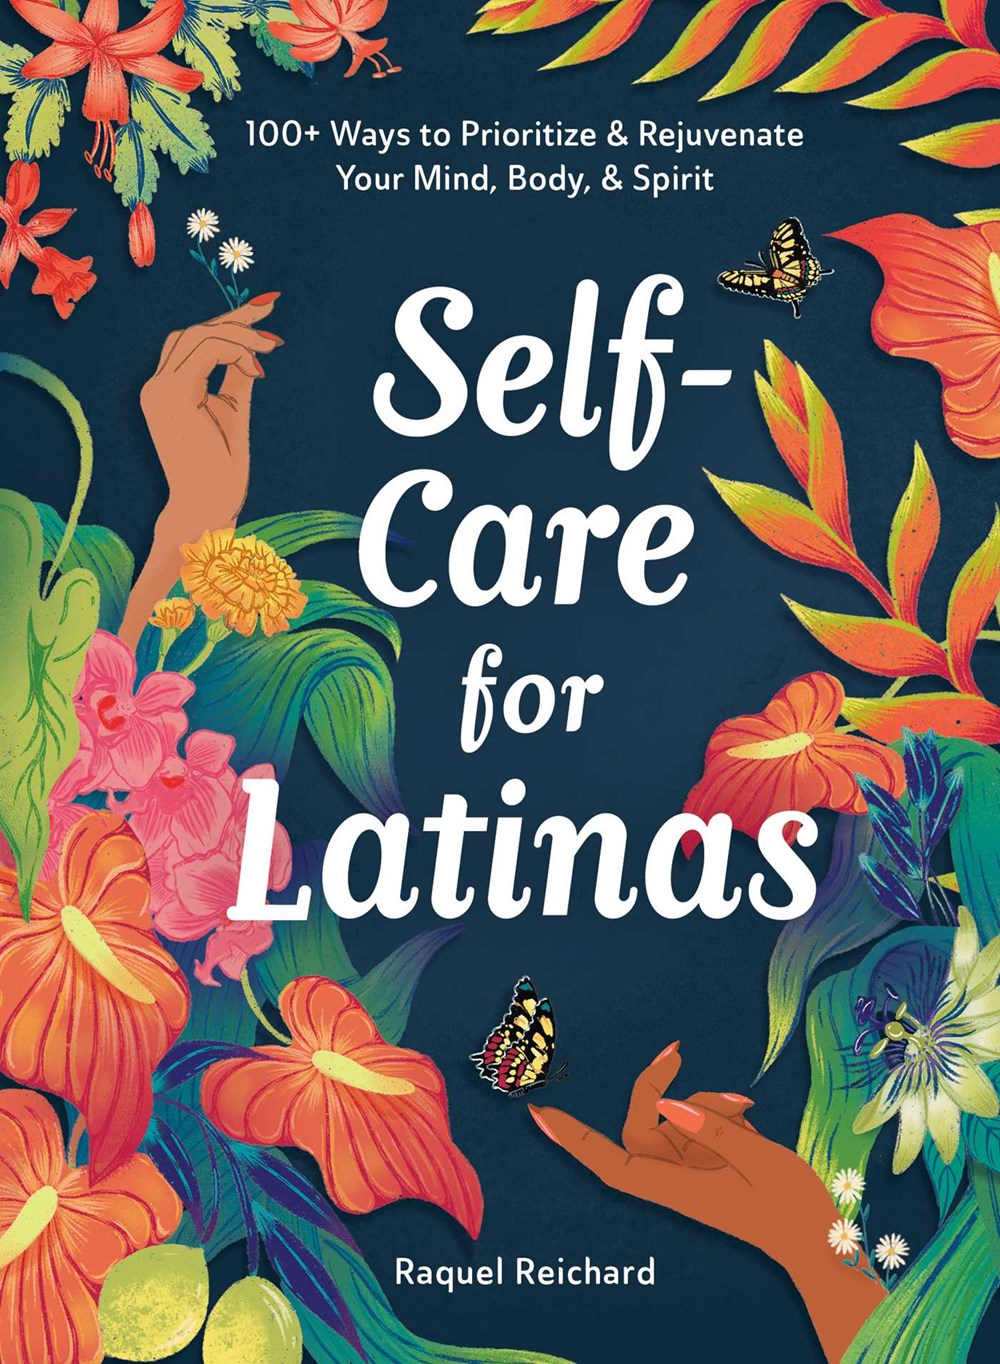 Self-Care for Latinas: 100+ Ways to Prioritize & Rejuvenate Your Mind, Body & Spirit by Raquel Reichard (Hardcover) (PREORDER)